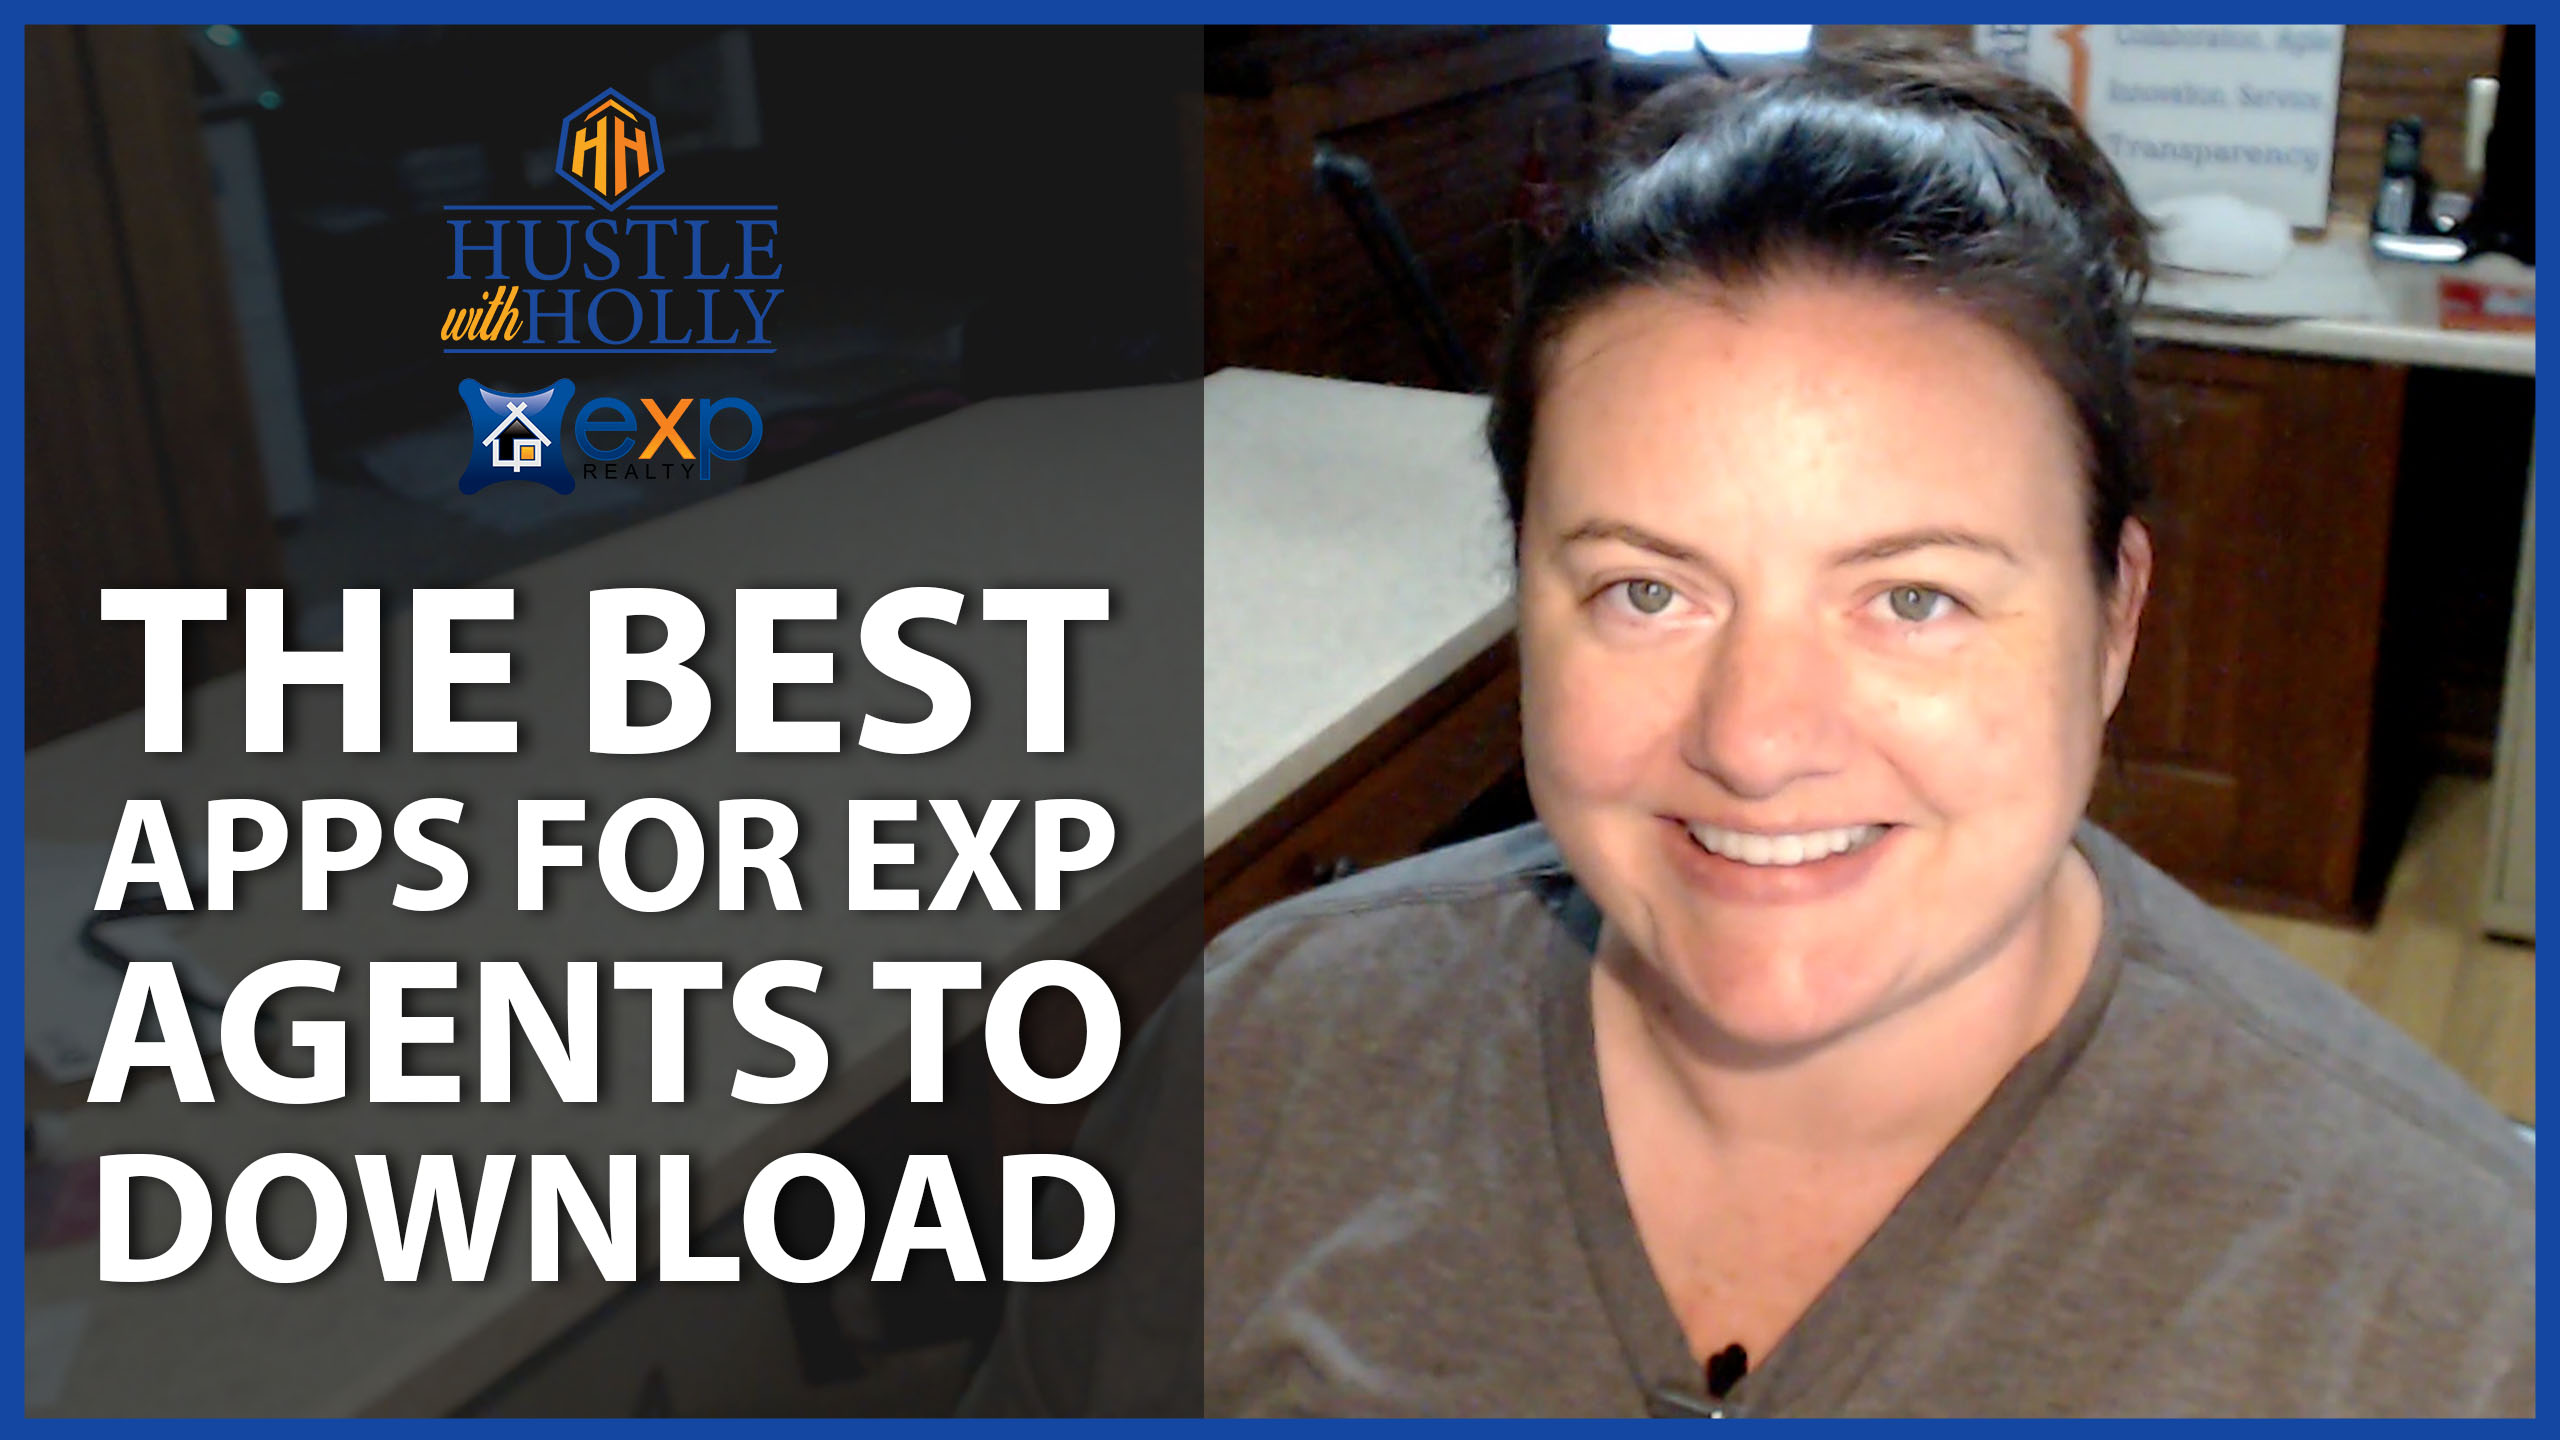 Q: Which Apps Should Every eXp Agent Have on Their Phone?